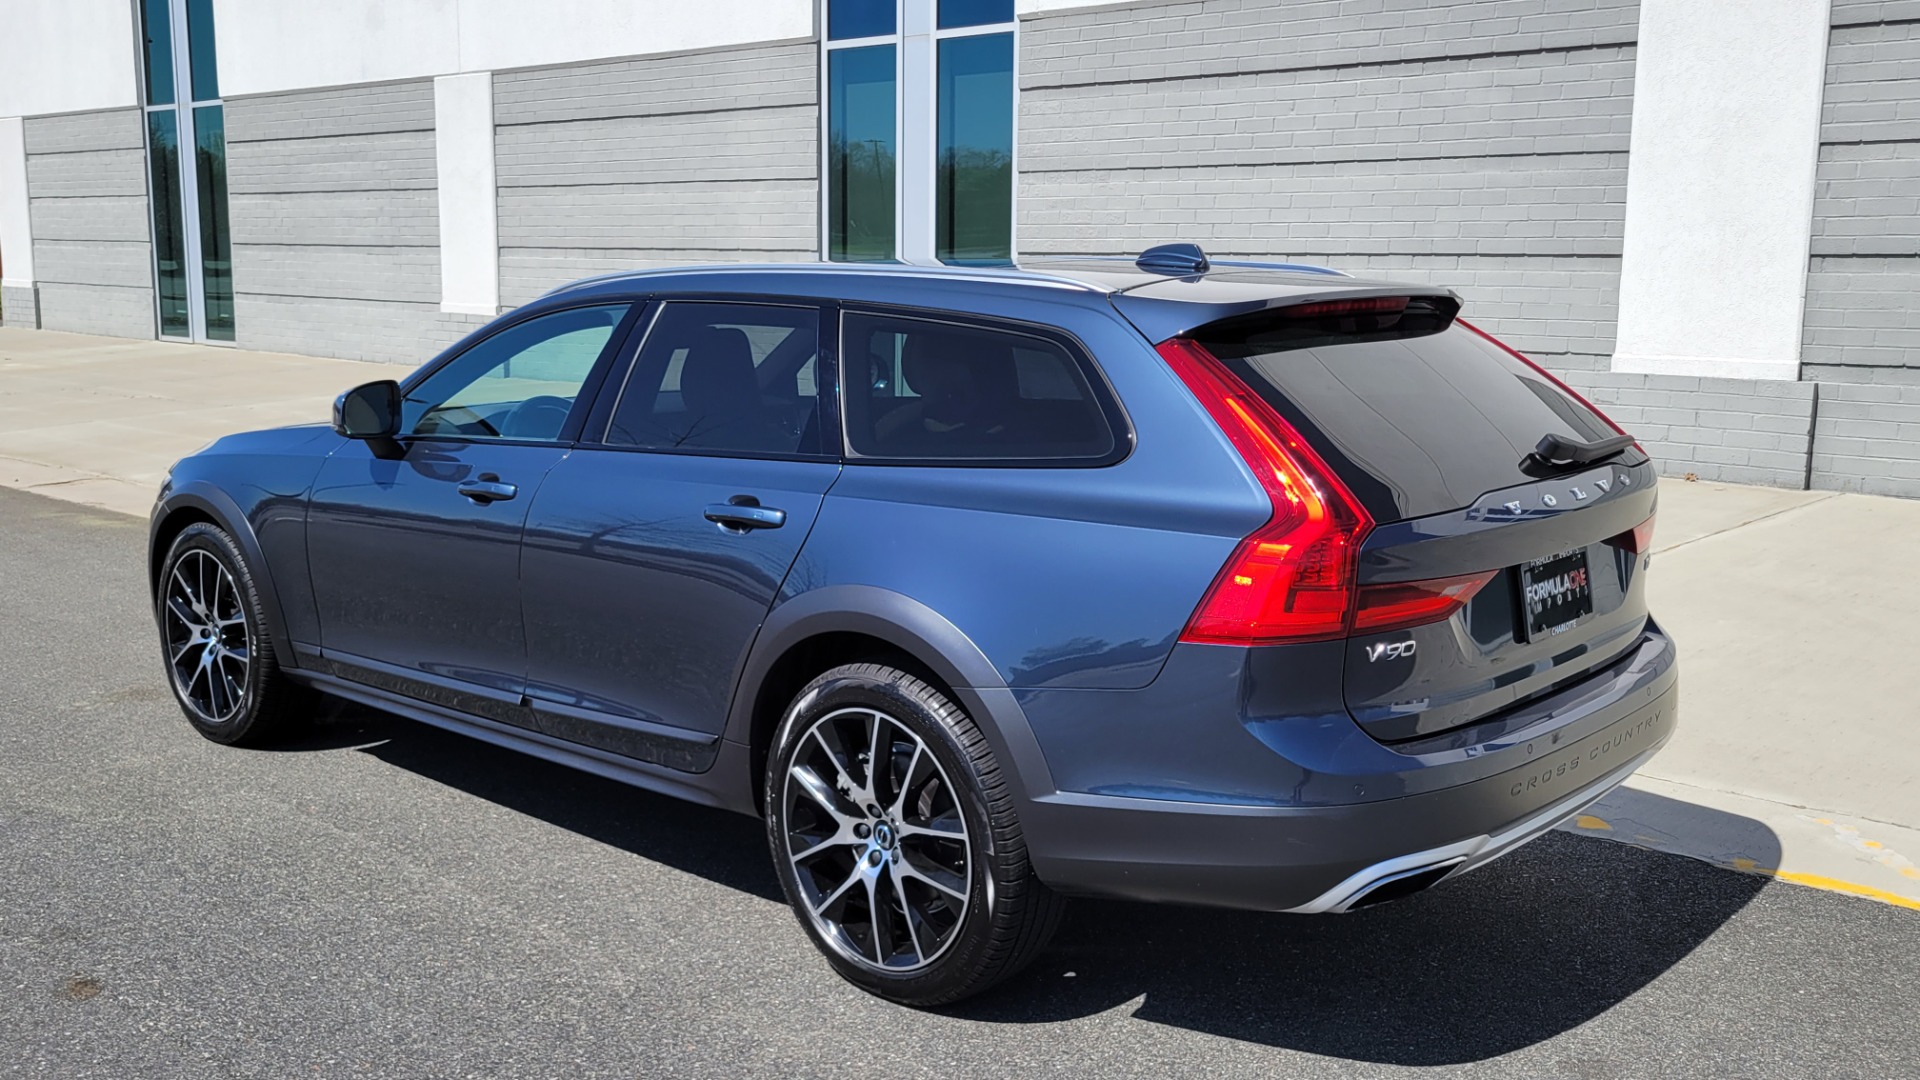 Used 2020 Volvo V90 CROSS COUNTRY T6 2.0L WAGON / AWD / HTD STS / PROTECTION PKG / REARVIEW for sale $51,000 at Formula Imports in Charlotte NC 28227 6